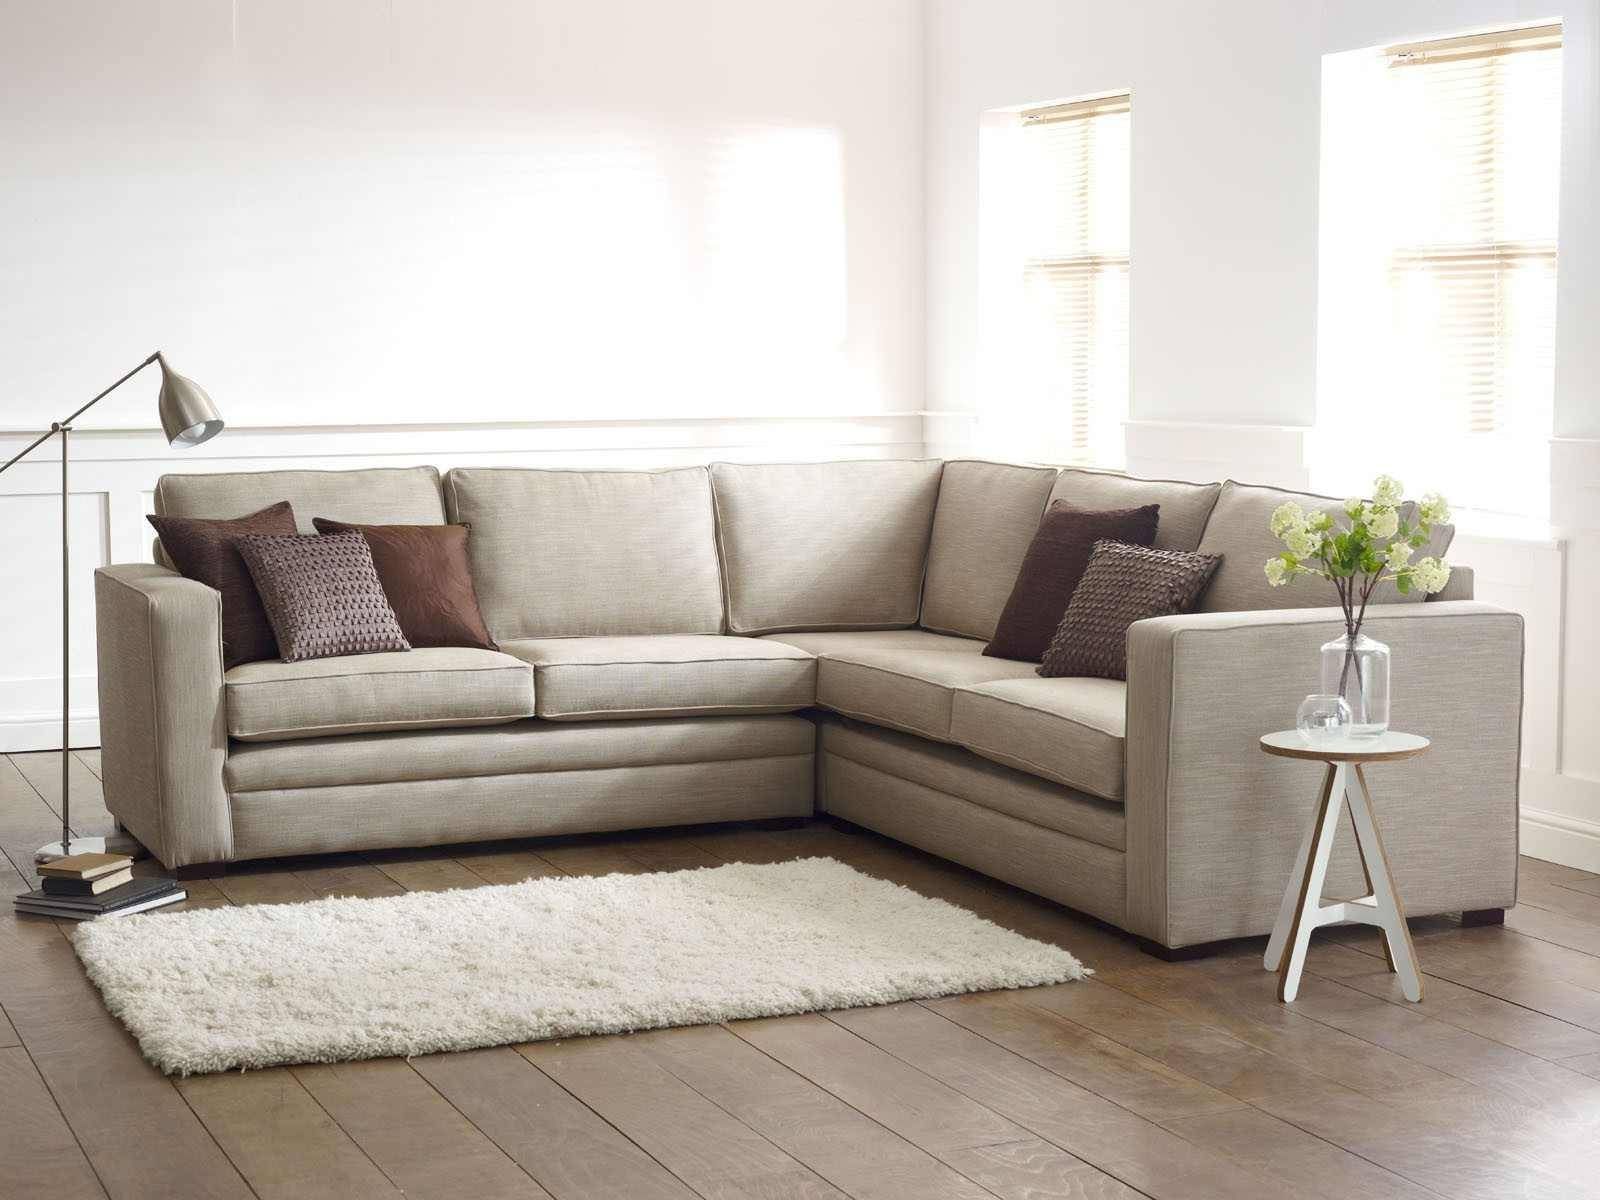 ▻ Sofa : 38 Orange Leather Sectional Sofa With Chaise Lounge Within Leather L Shaped Sectional Sofas (View 4 of 30)